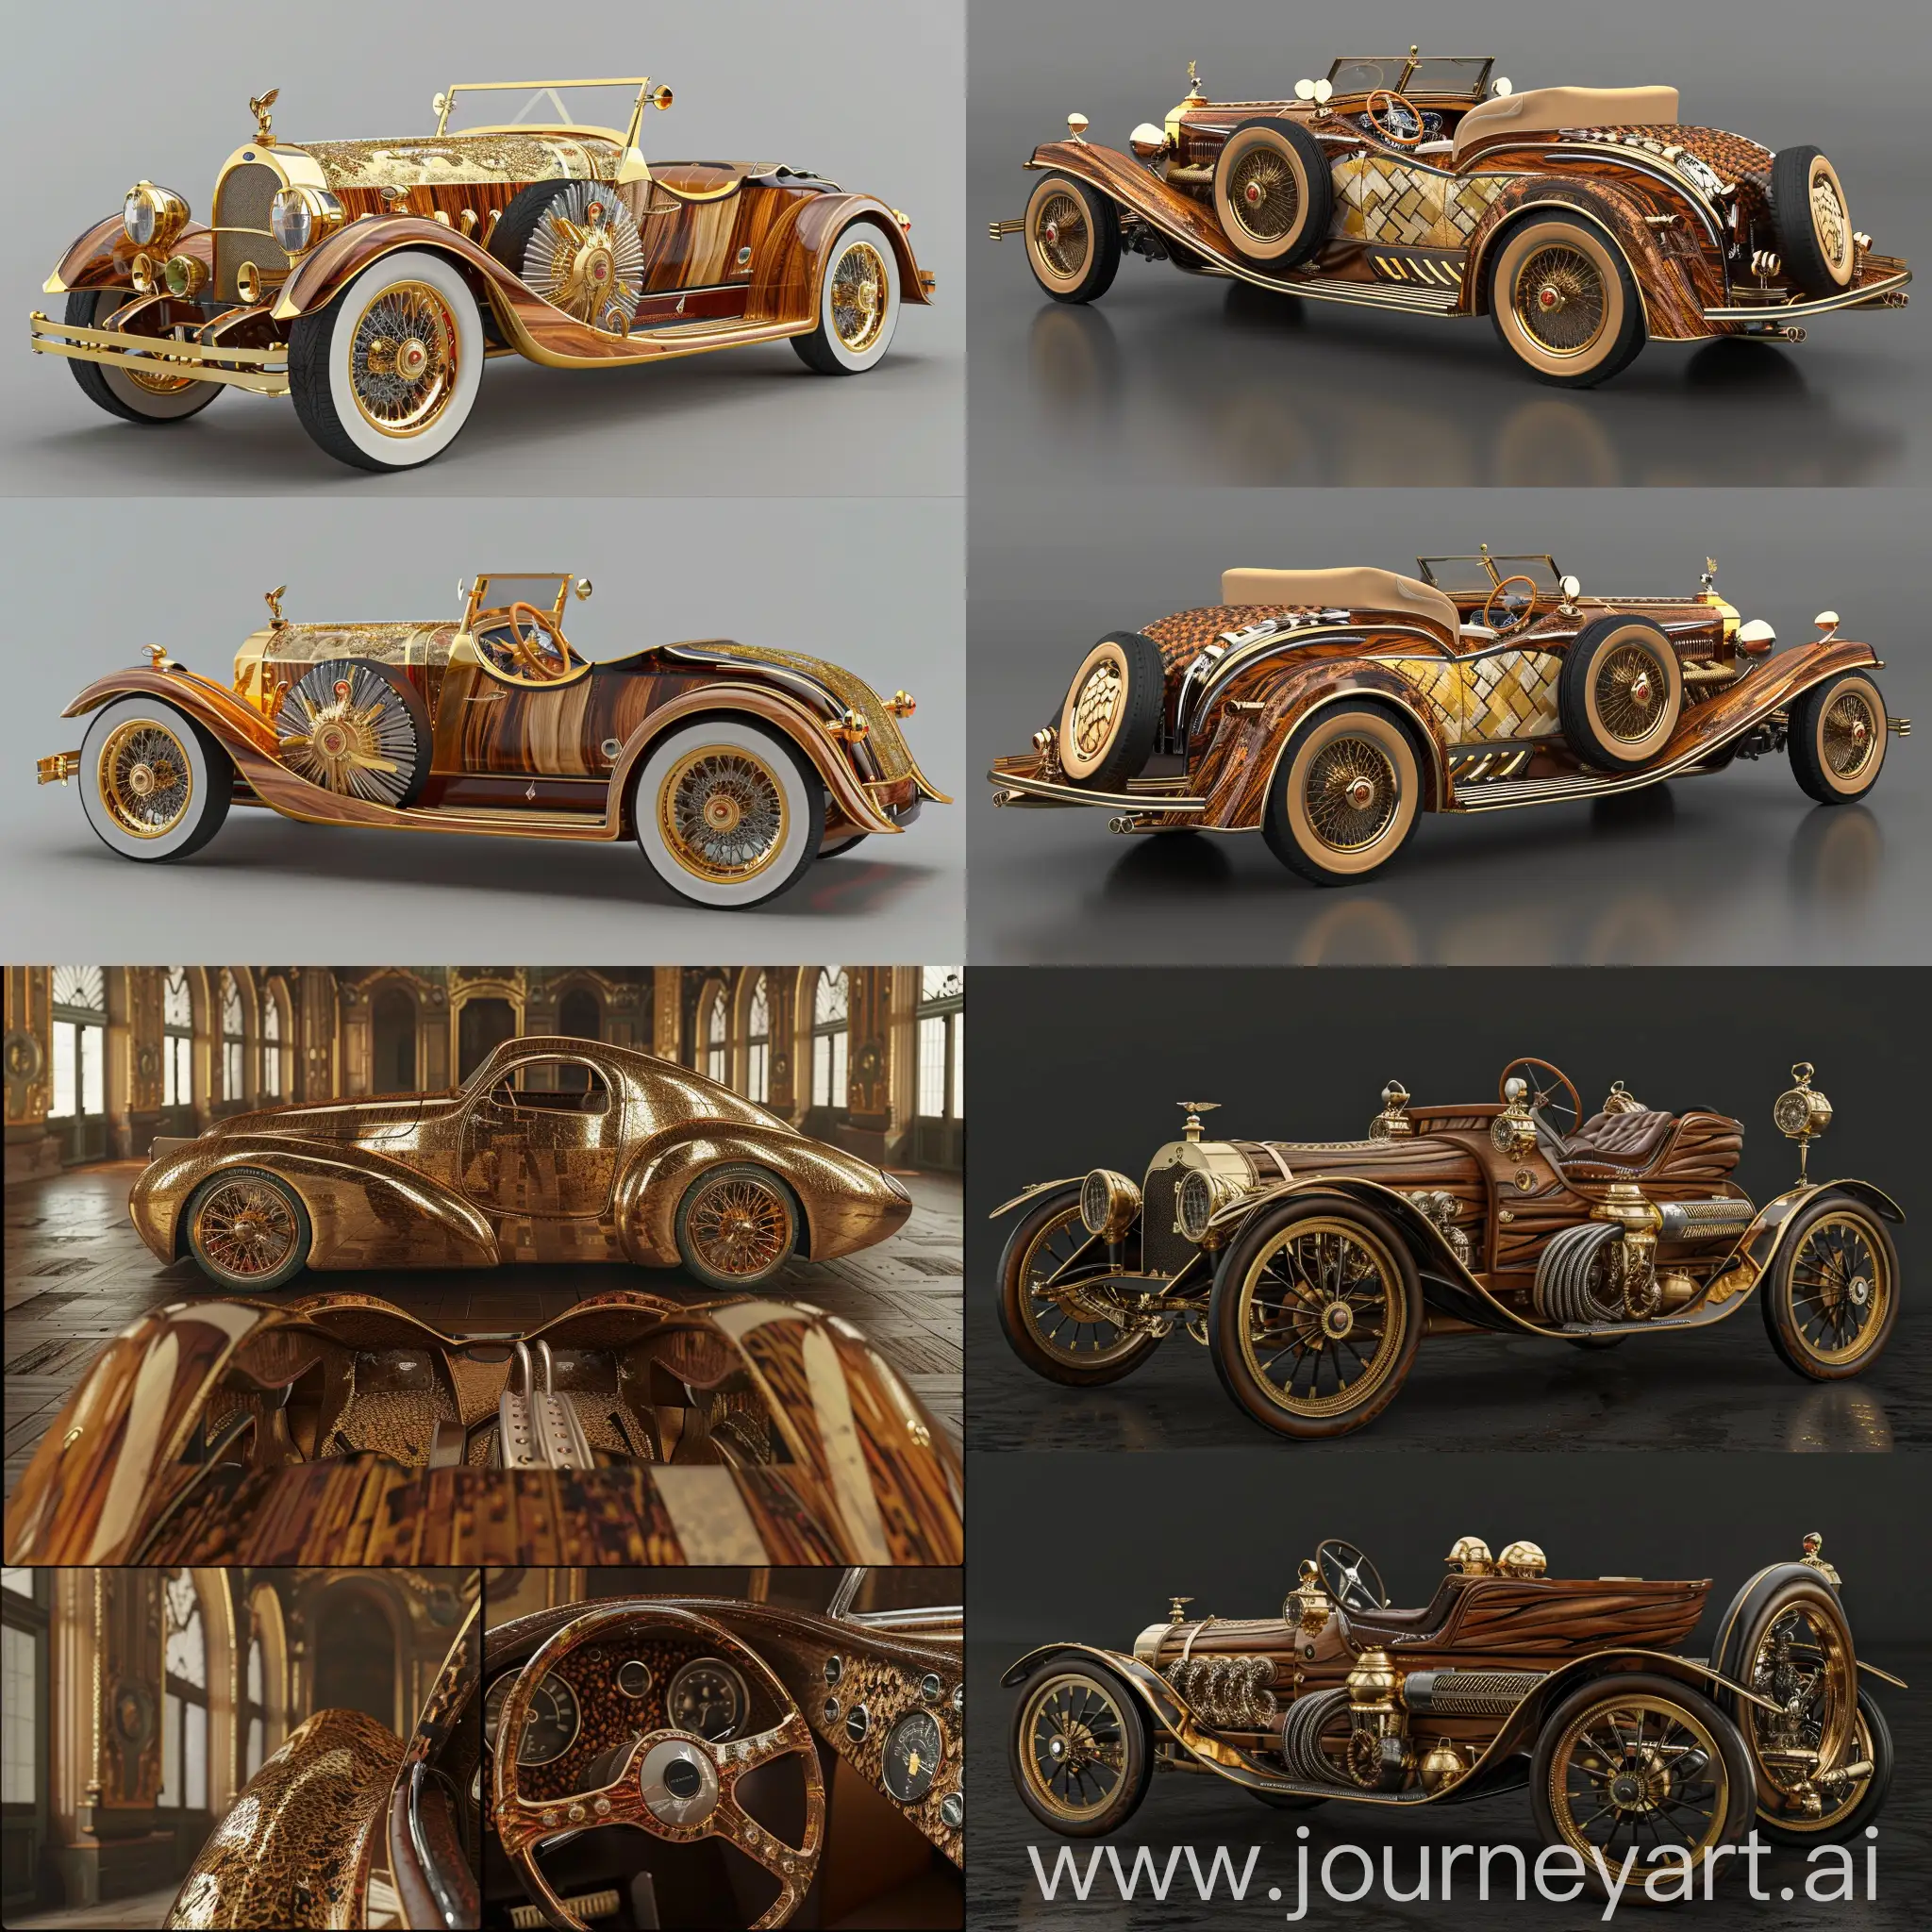 Vintage-Car-Inspired-by-Harley-Davidson-Detailed-Authentic-Rendering-with-Gold-Wood-and-Ceramic-Accents